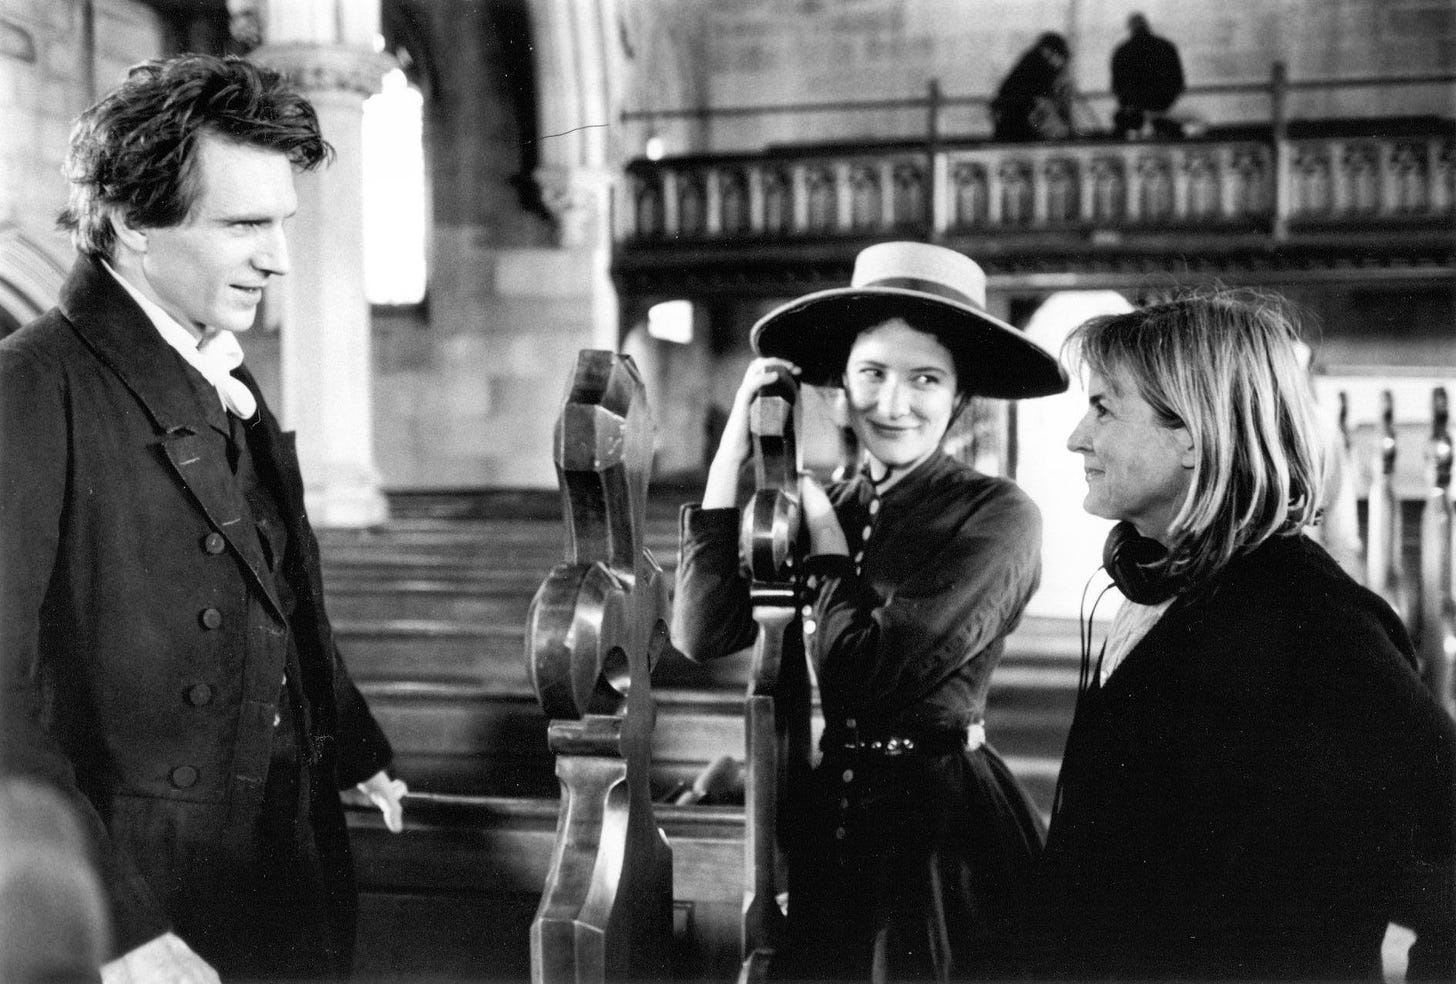 Ralph Fiennes and Cate Blanchett with film director Gillian Armstrong on  the set of "Oscar and Lucinda", 1997. | Oscar and lucinda, Ralph fiennes, Cate  blanchett